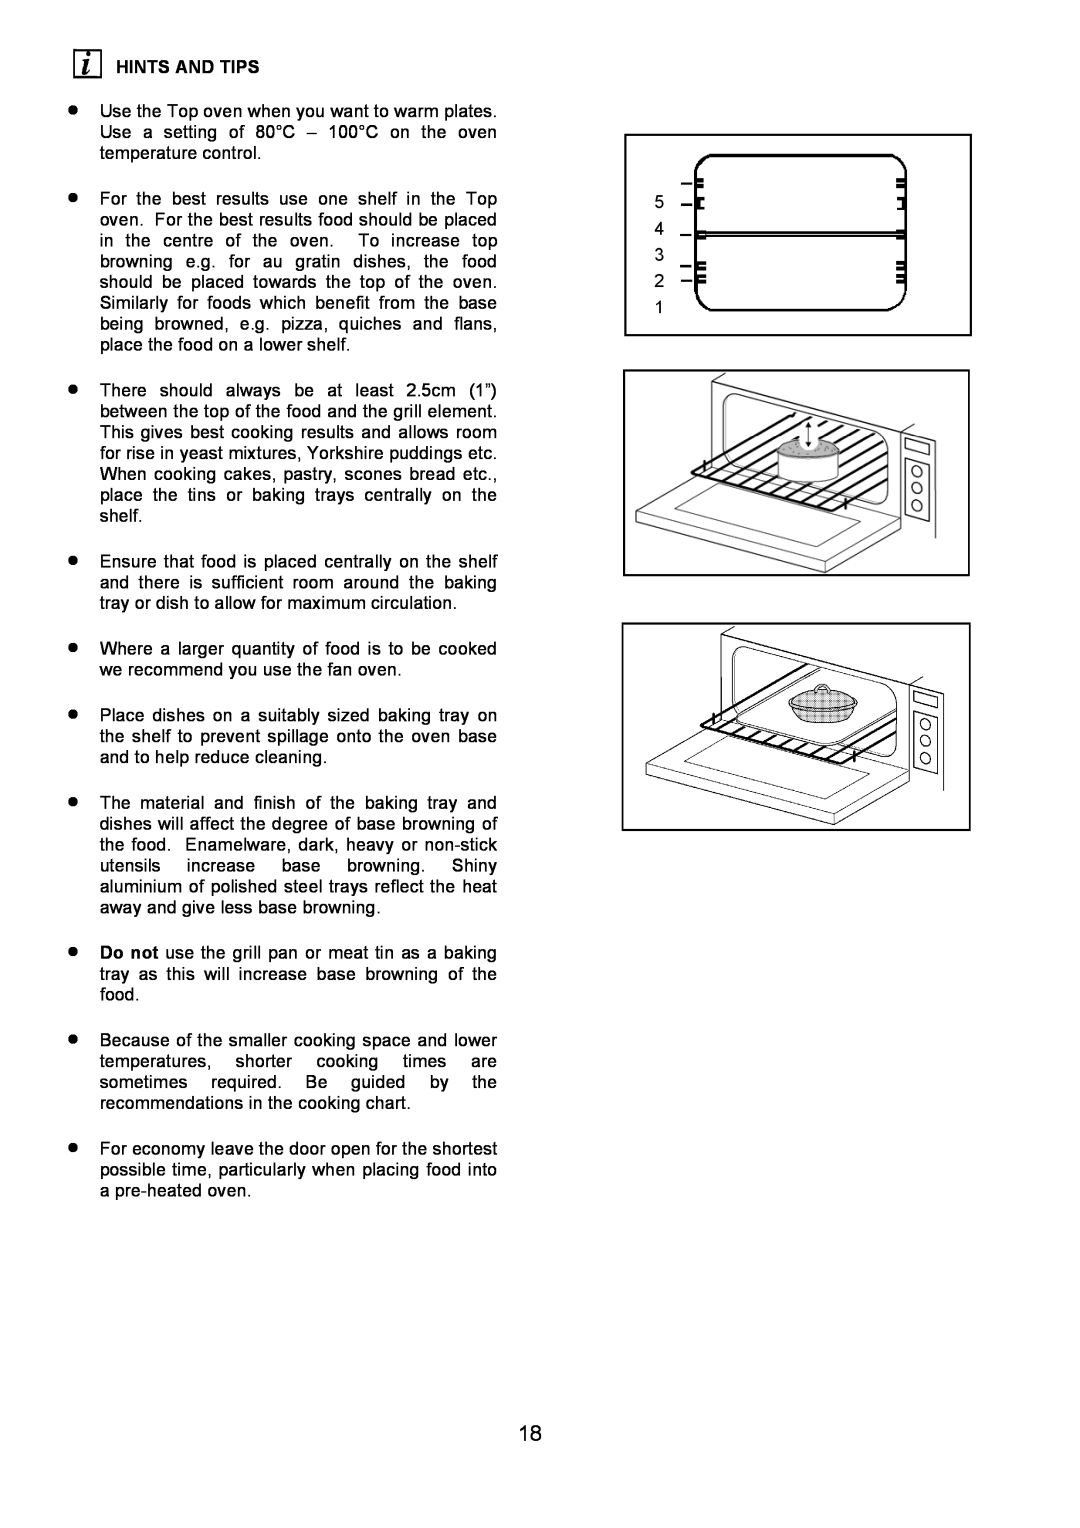 AEG 3210 BU installation instructions Hints And Tips 